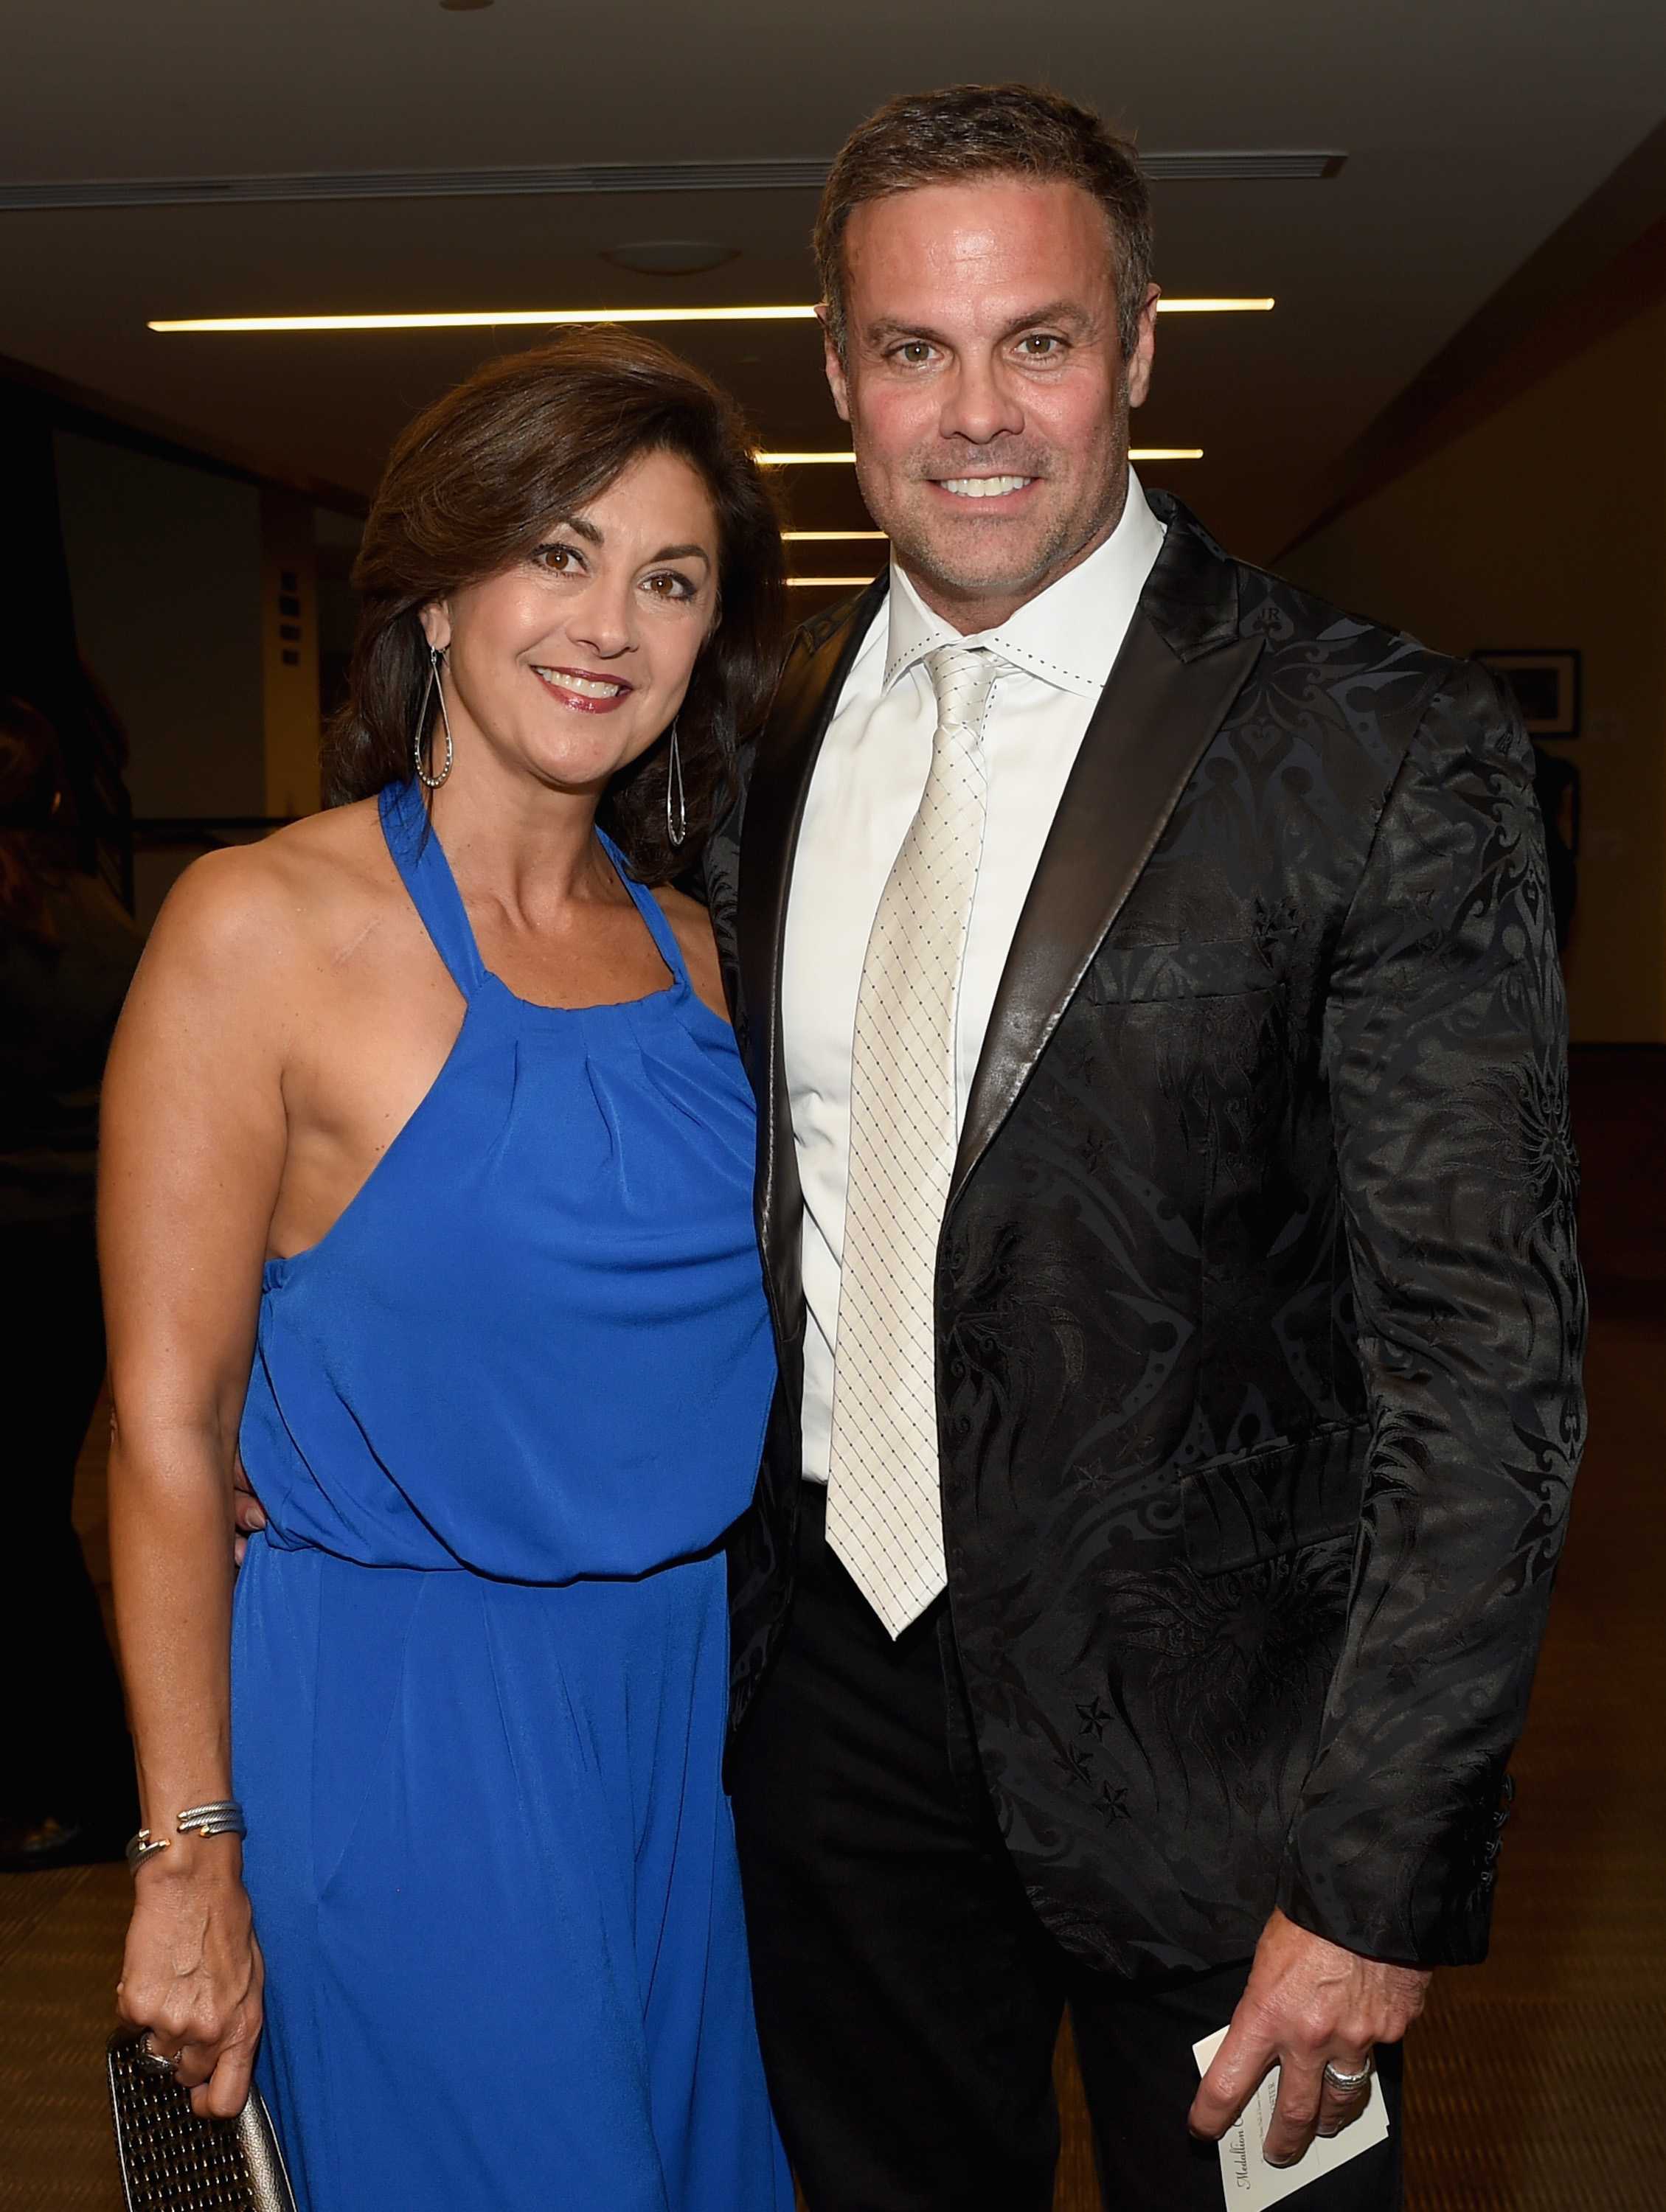 Troy Gentry's widow is suing the helicopter manufacturers for the crash that killed her husband